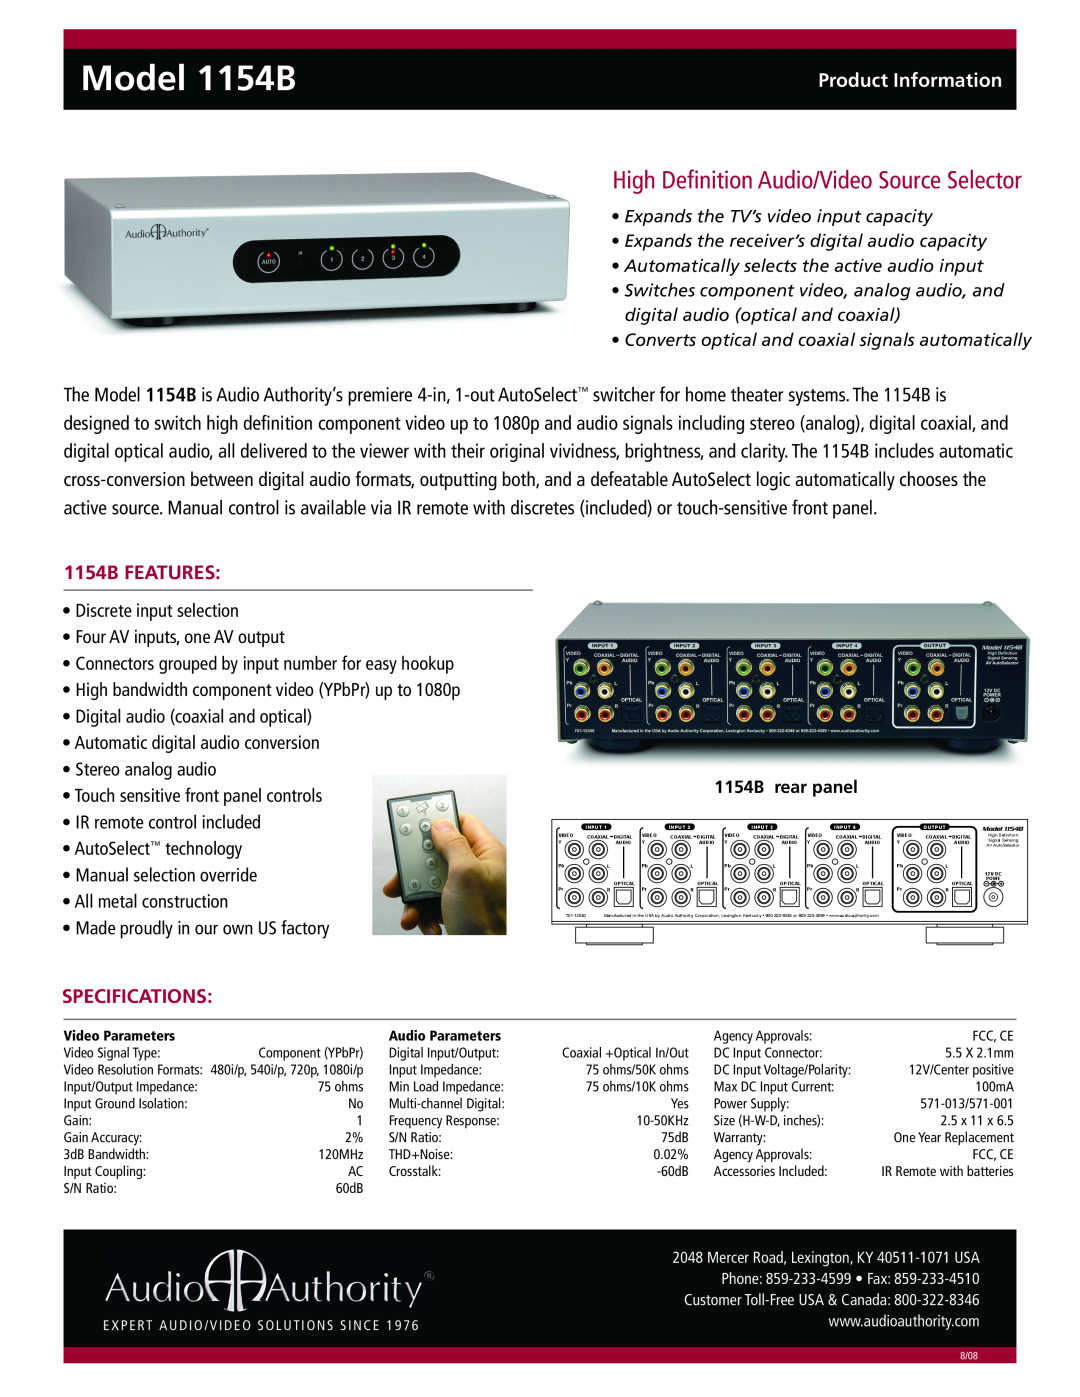 Audio Authority specifications Model 1154B, High Definition Audio/Video Source Selector, Product Information 